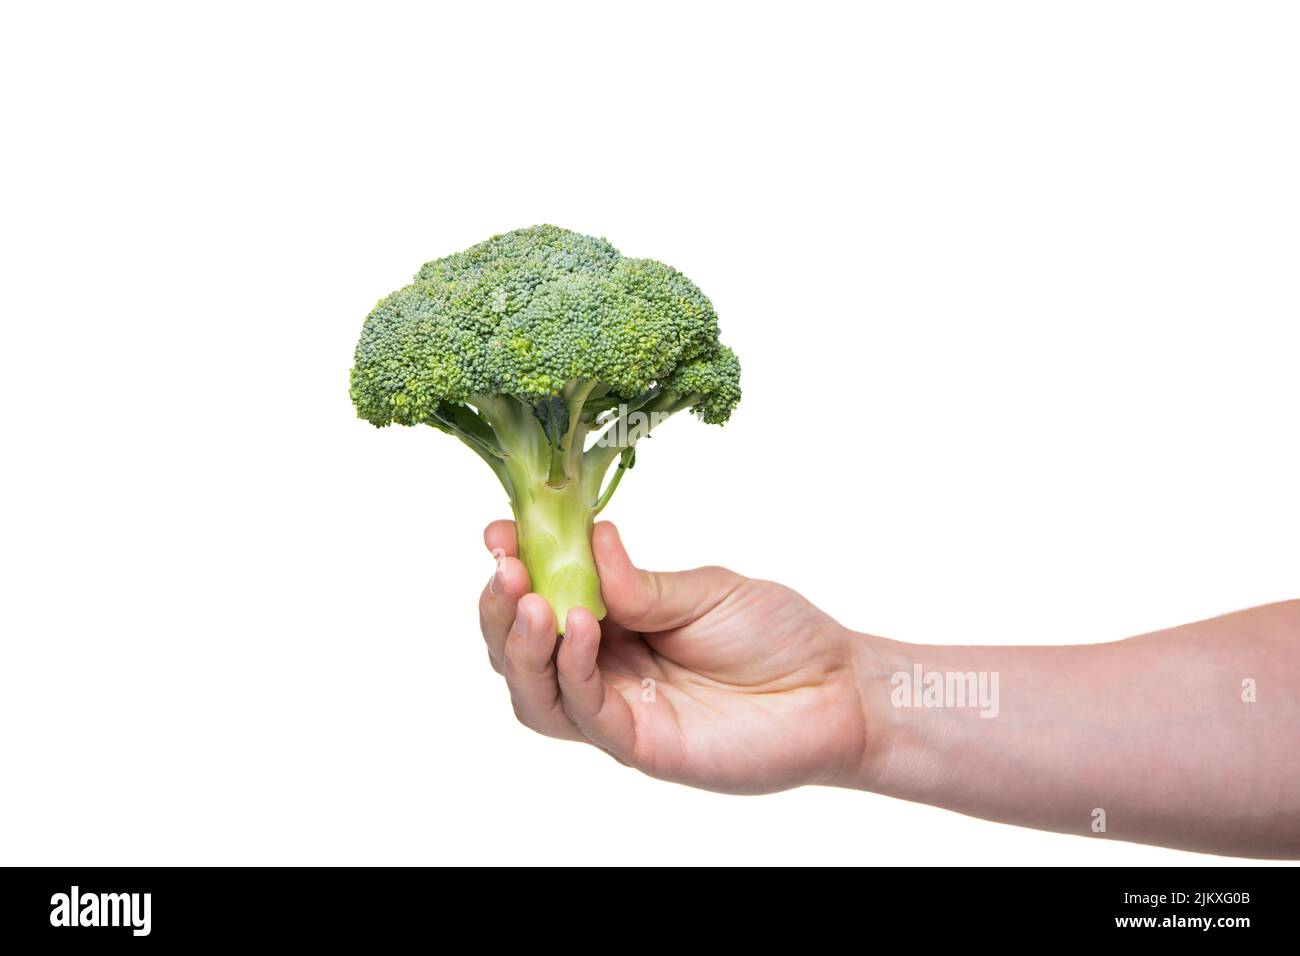 broccoli green vegetable in hand isolated on white background Stock Photo